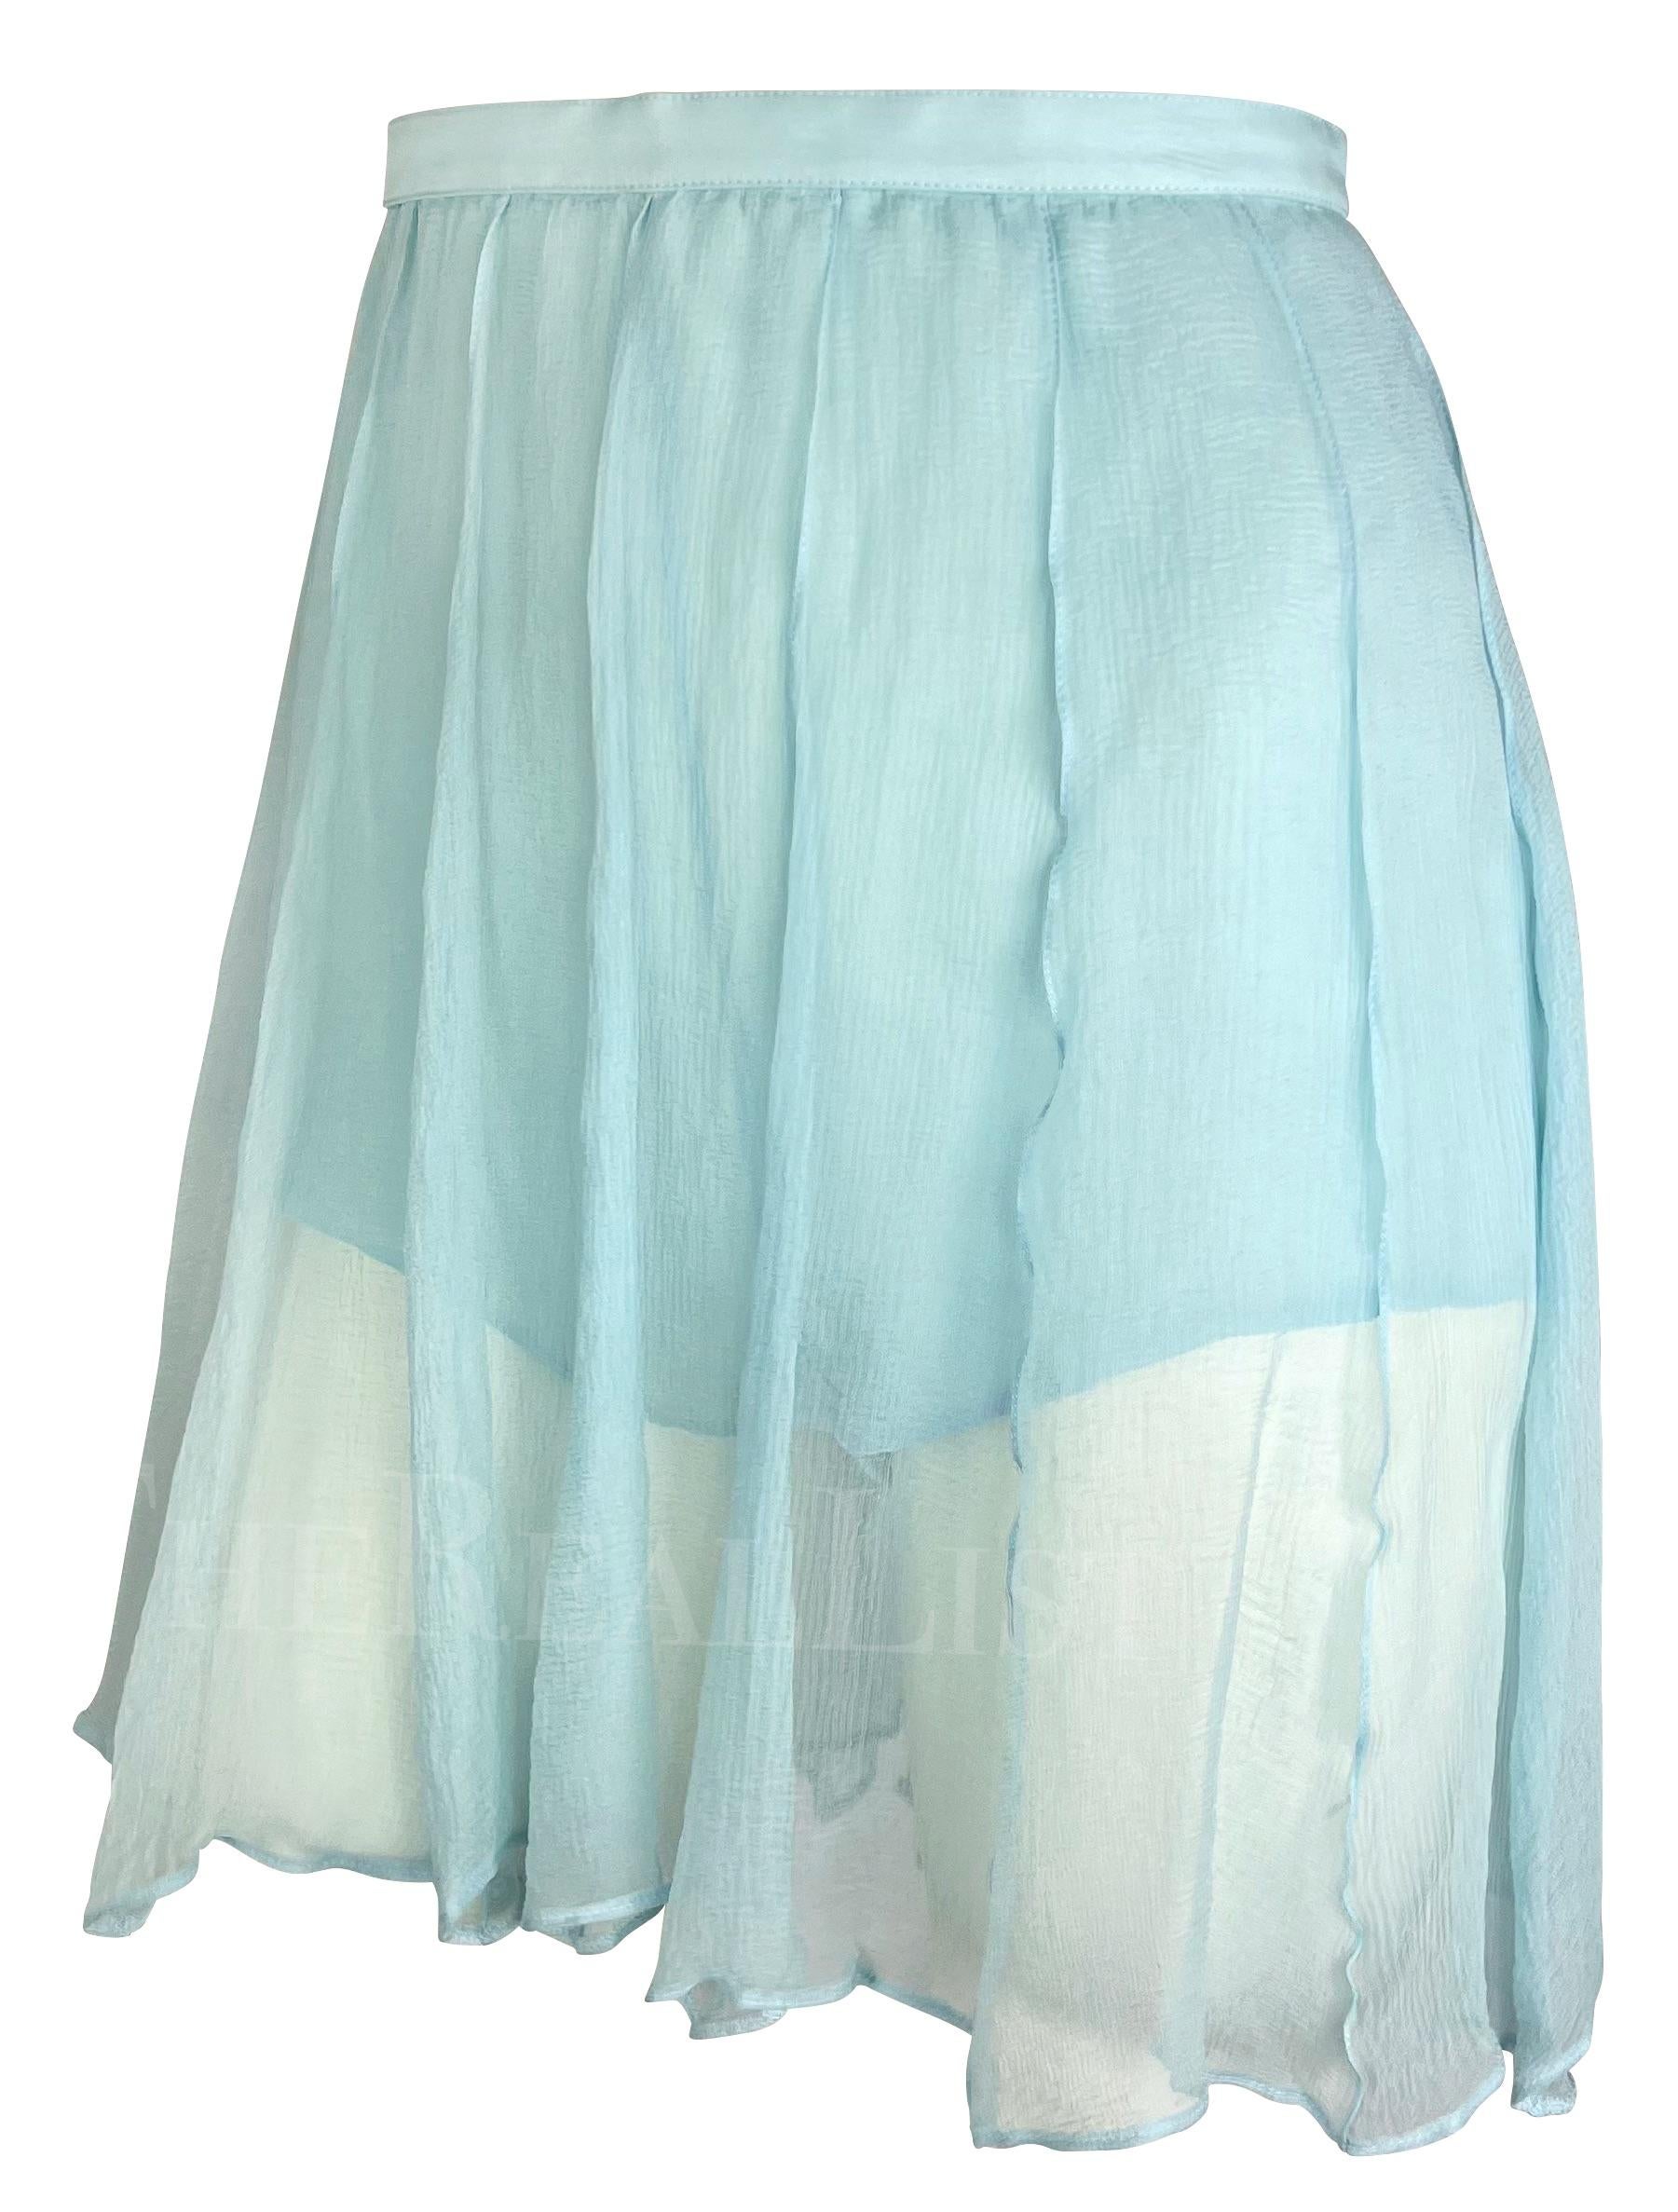 Presenting a light blue Thierry Mugler skirt, designed by Manfred Mugler. From the 1990s, this piece is meticulously crafted from light blue silk. The skirt, featuring pleats and a high waist, is enhanced by an interior short layer. This breezy and